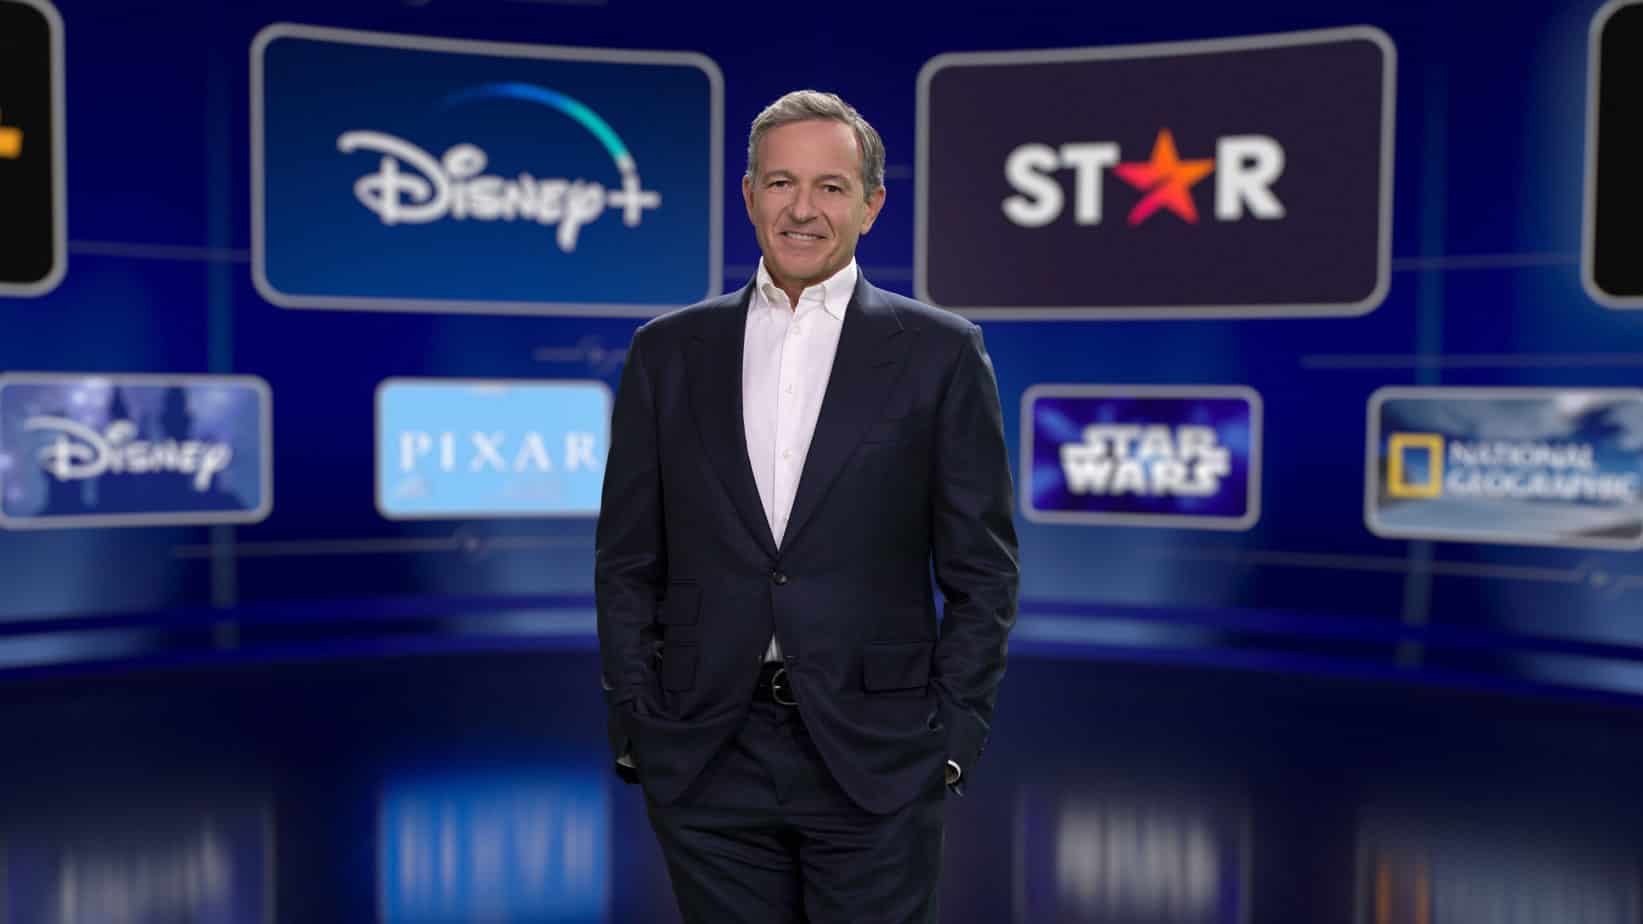 bob iger at disney investor day star wars announcements